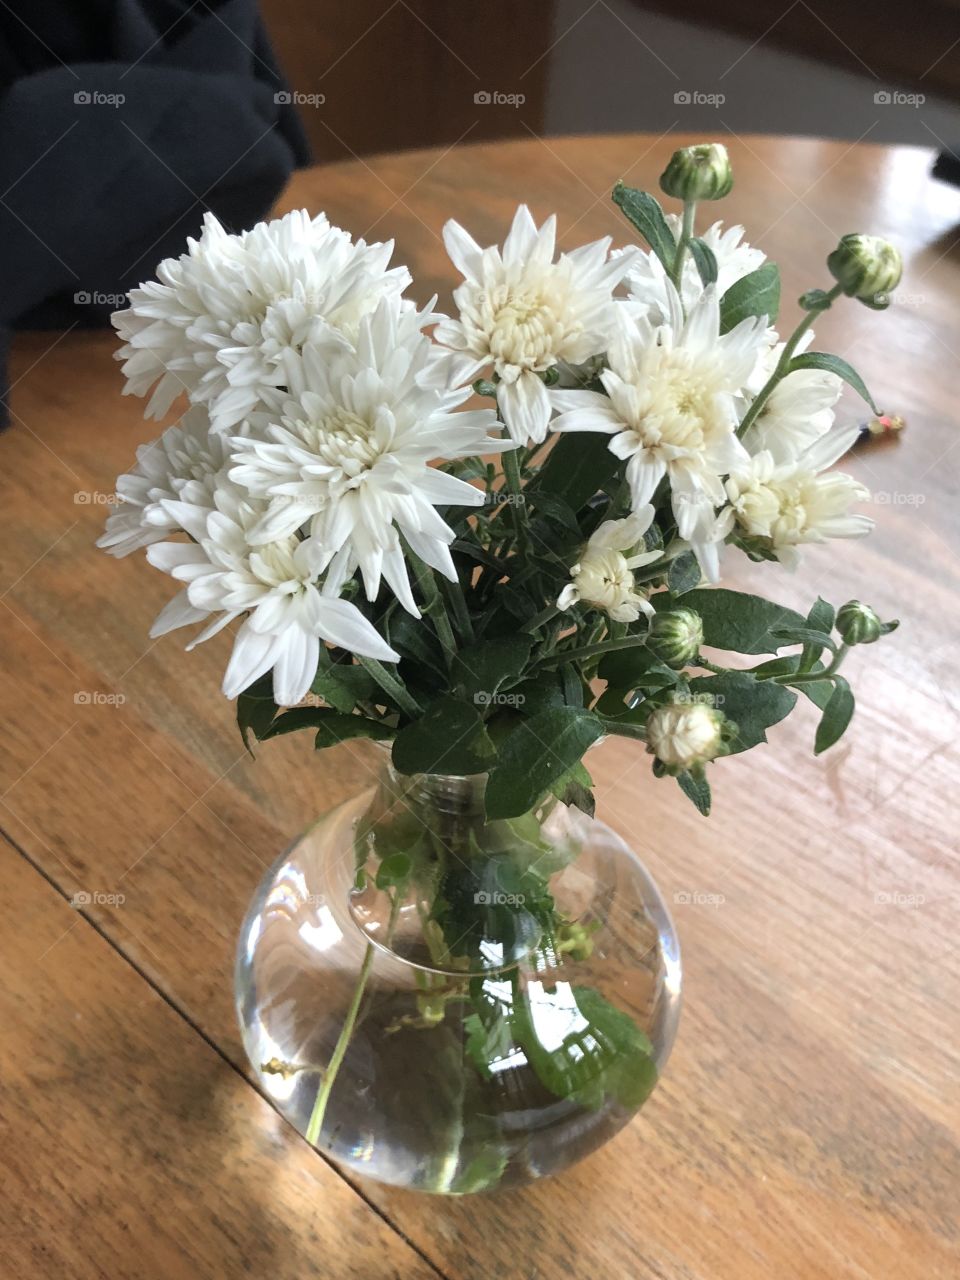 Mums with glass-ball vase